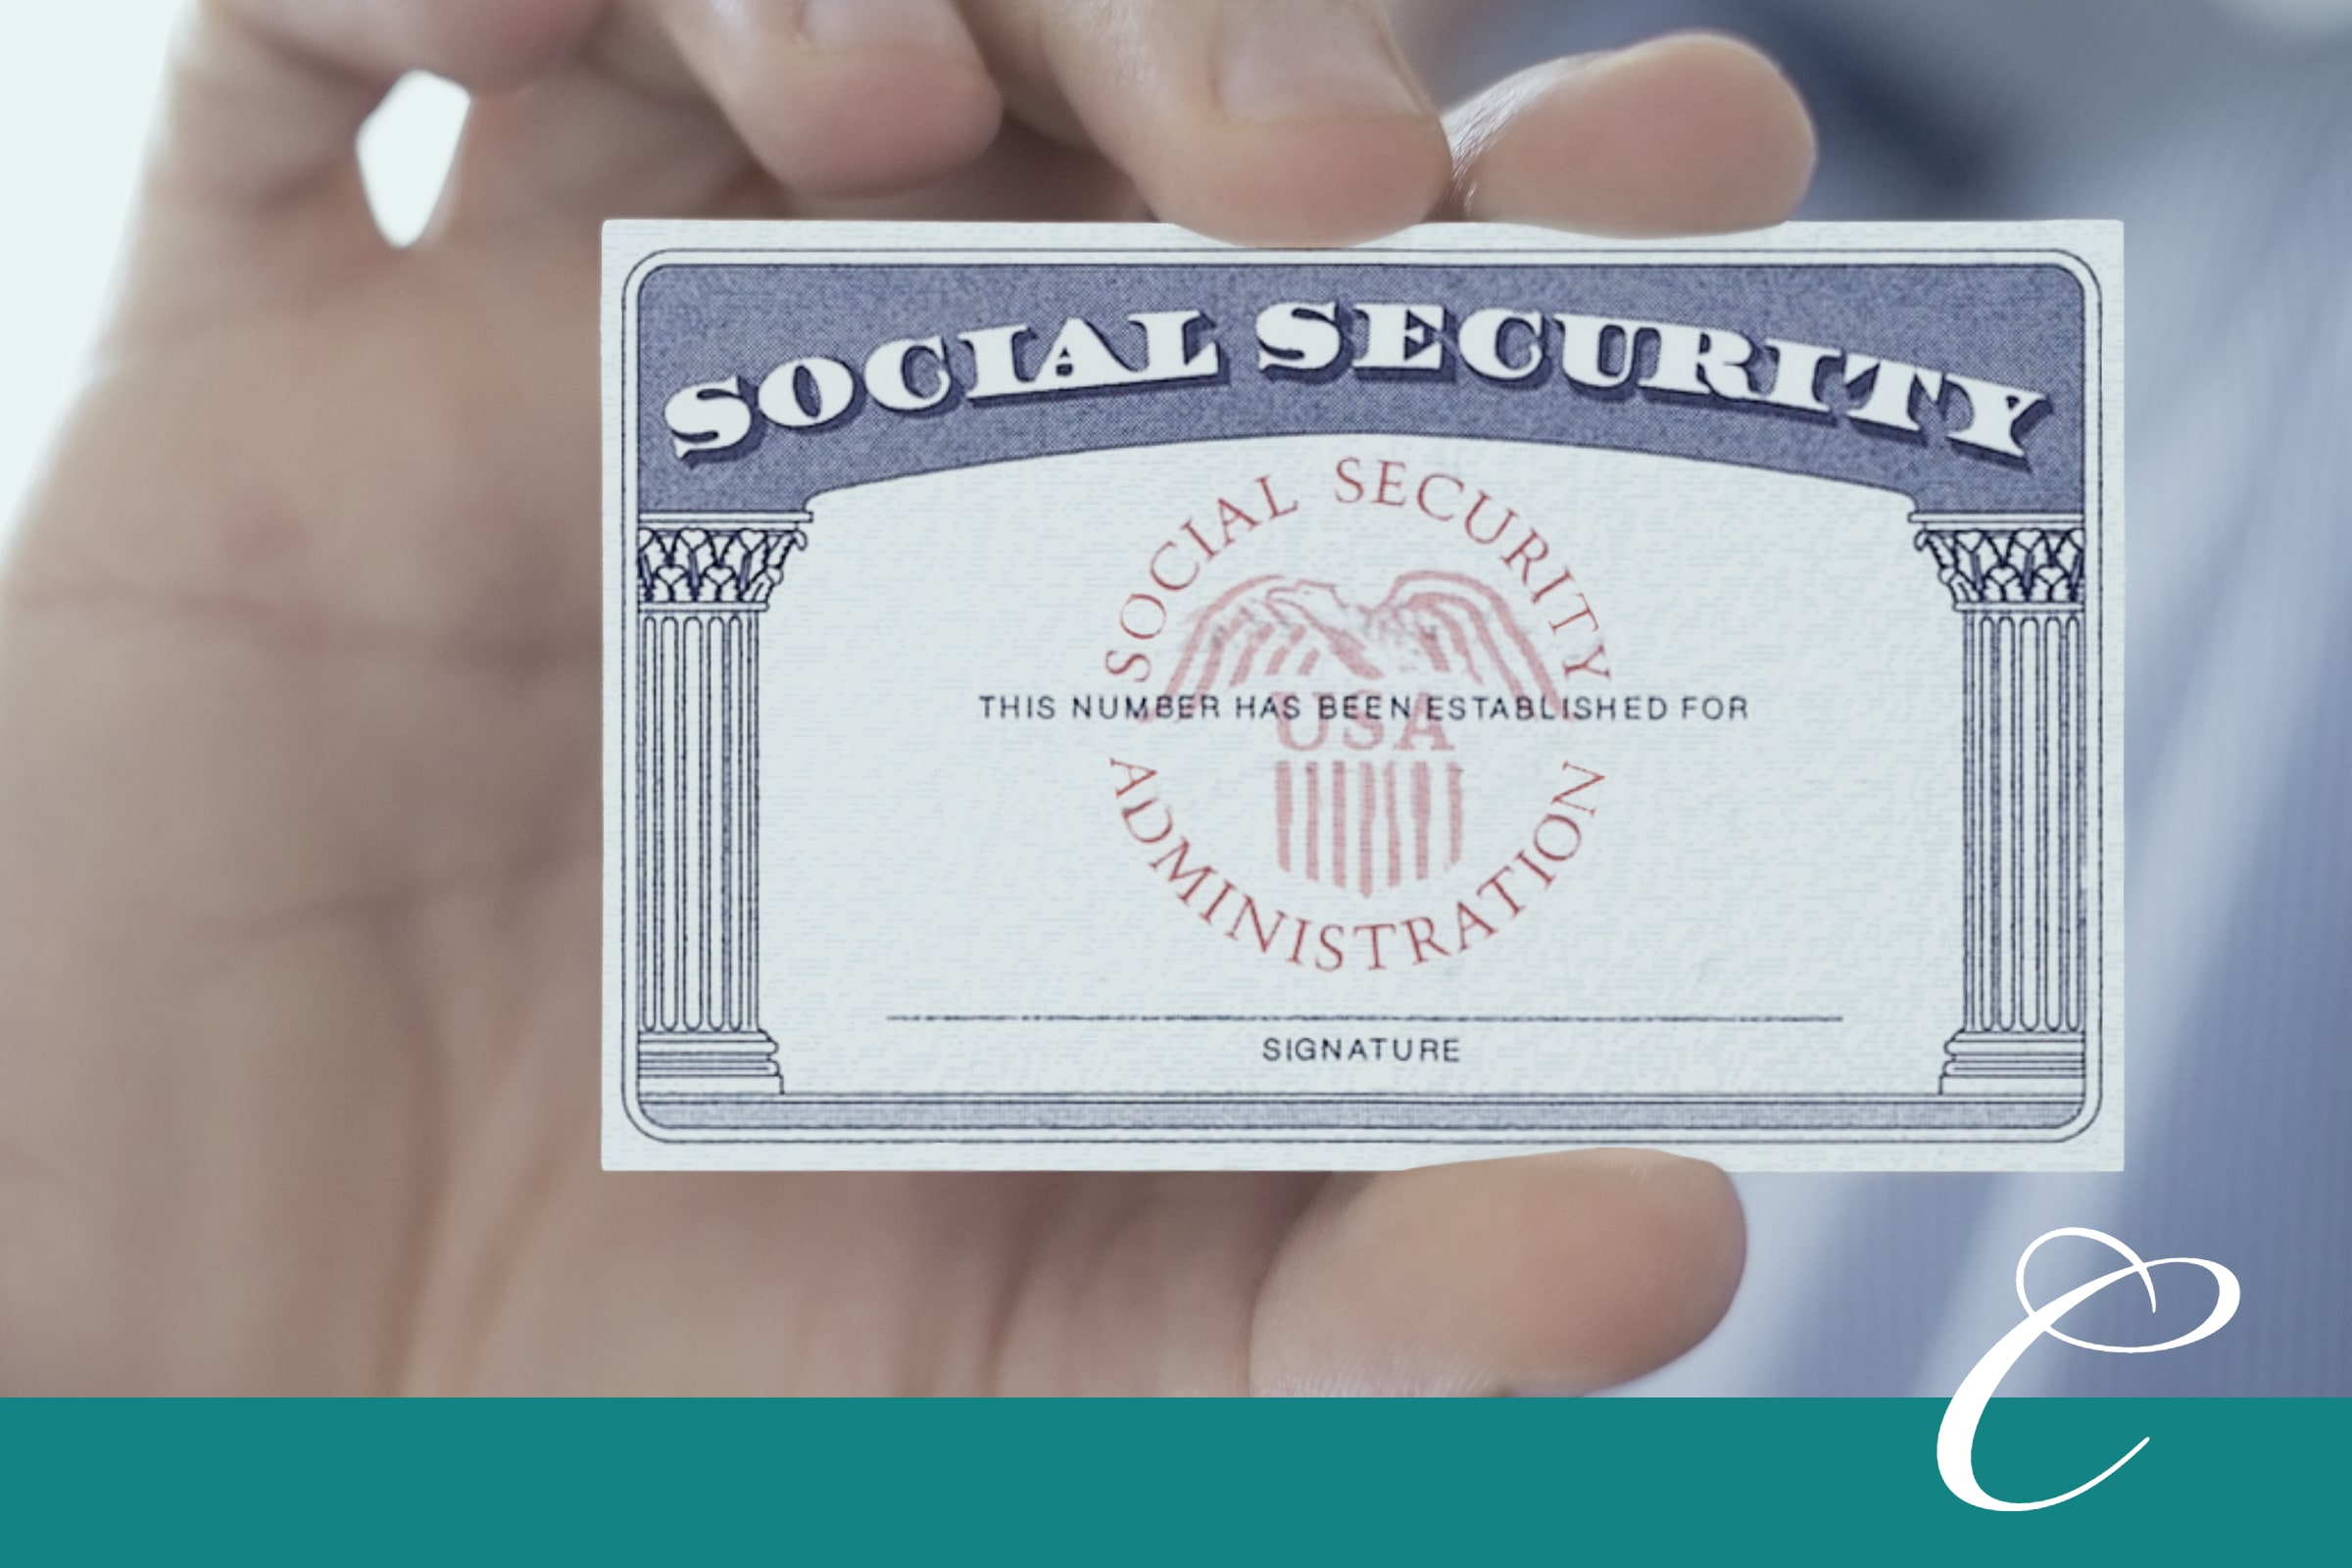 Believing Social Security myths can lead to making imprudent benefits decisions that hurt your bottom line.